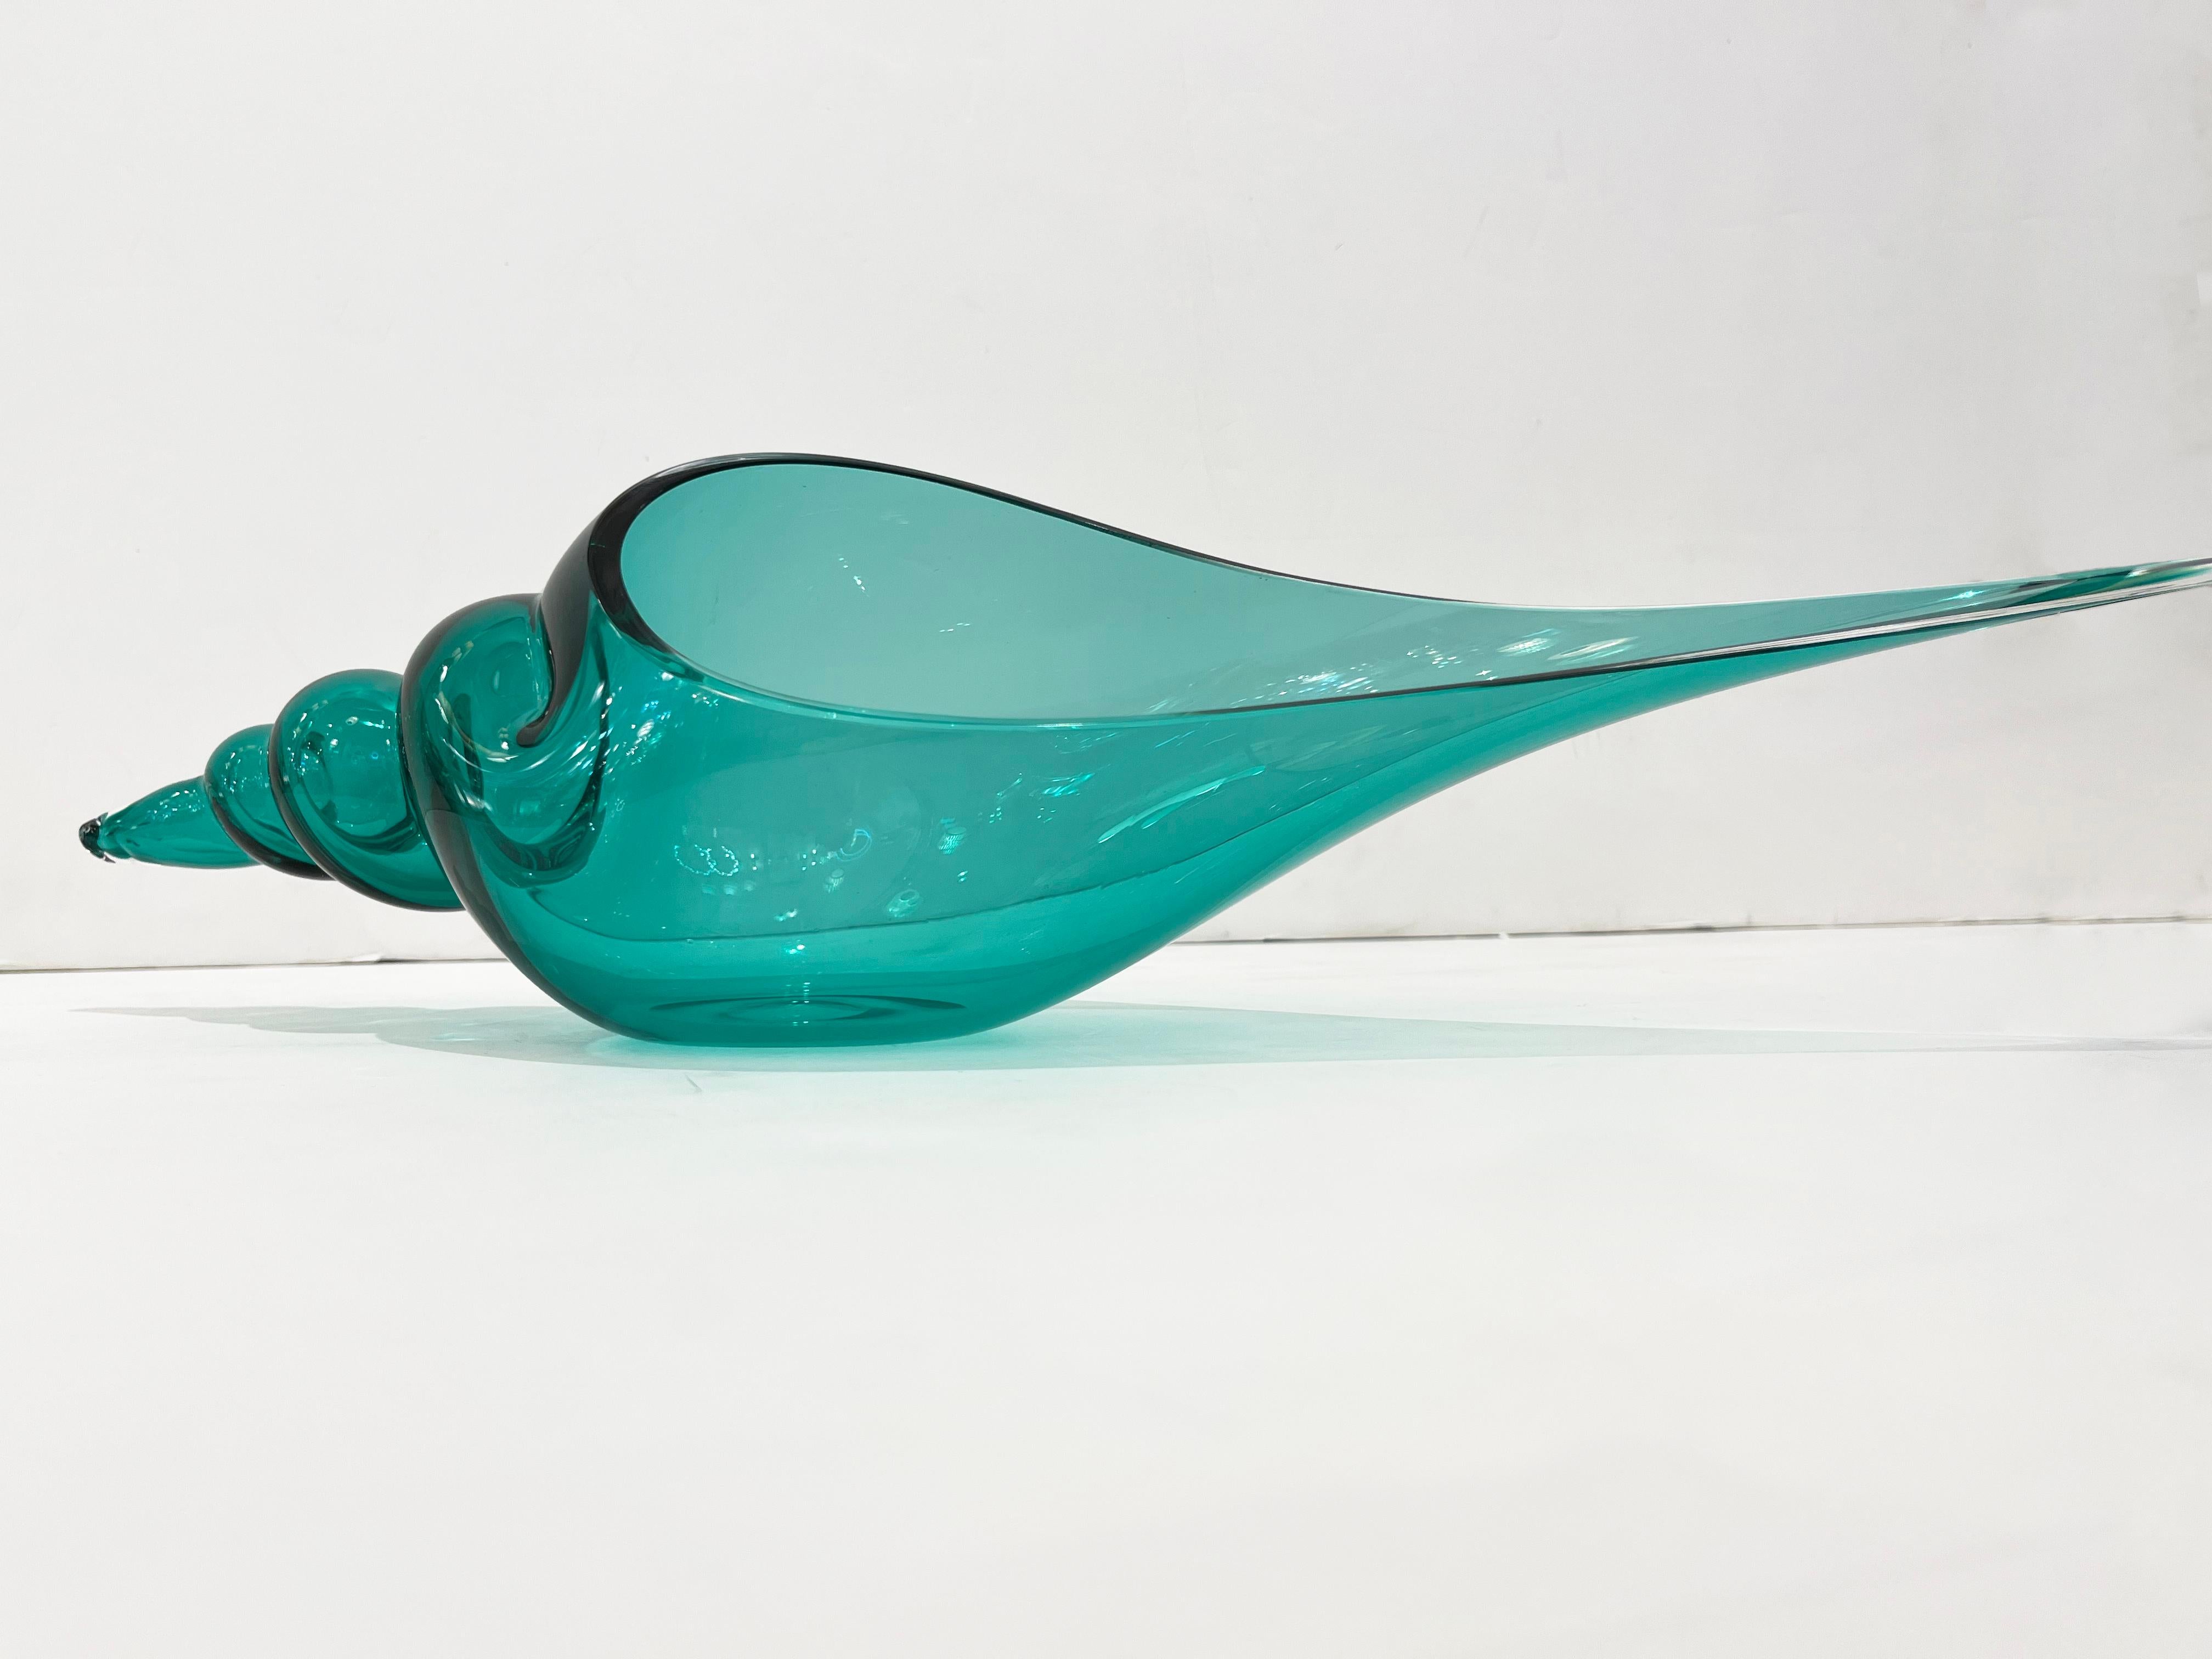 Bring the ocean indoors! This spire coiled shell in a transparent Art Murano Glass with an amazing teal aquamarine blue tint has been freely blown and hand crafted, with extraordinary skill, by Romano Donà on the Murano Island in the Bisazza